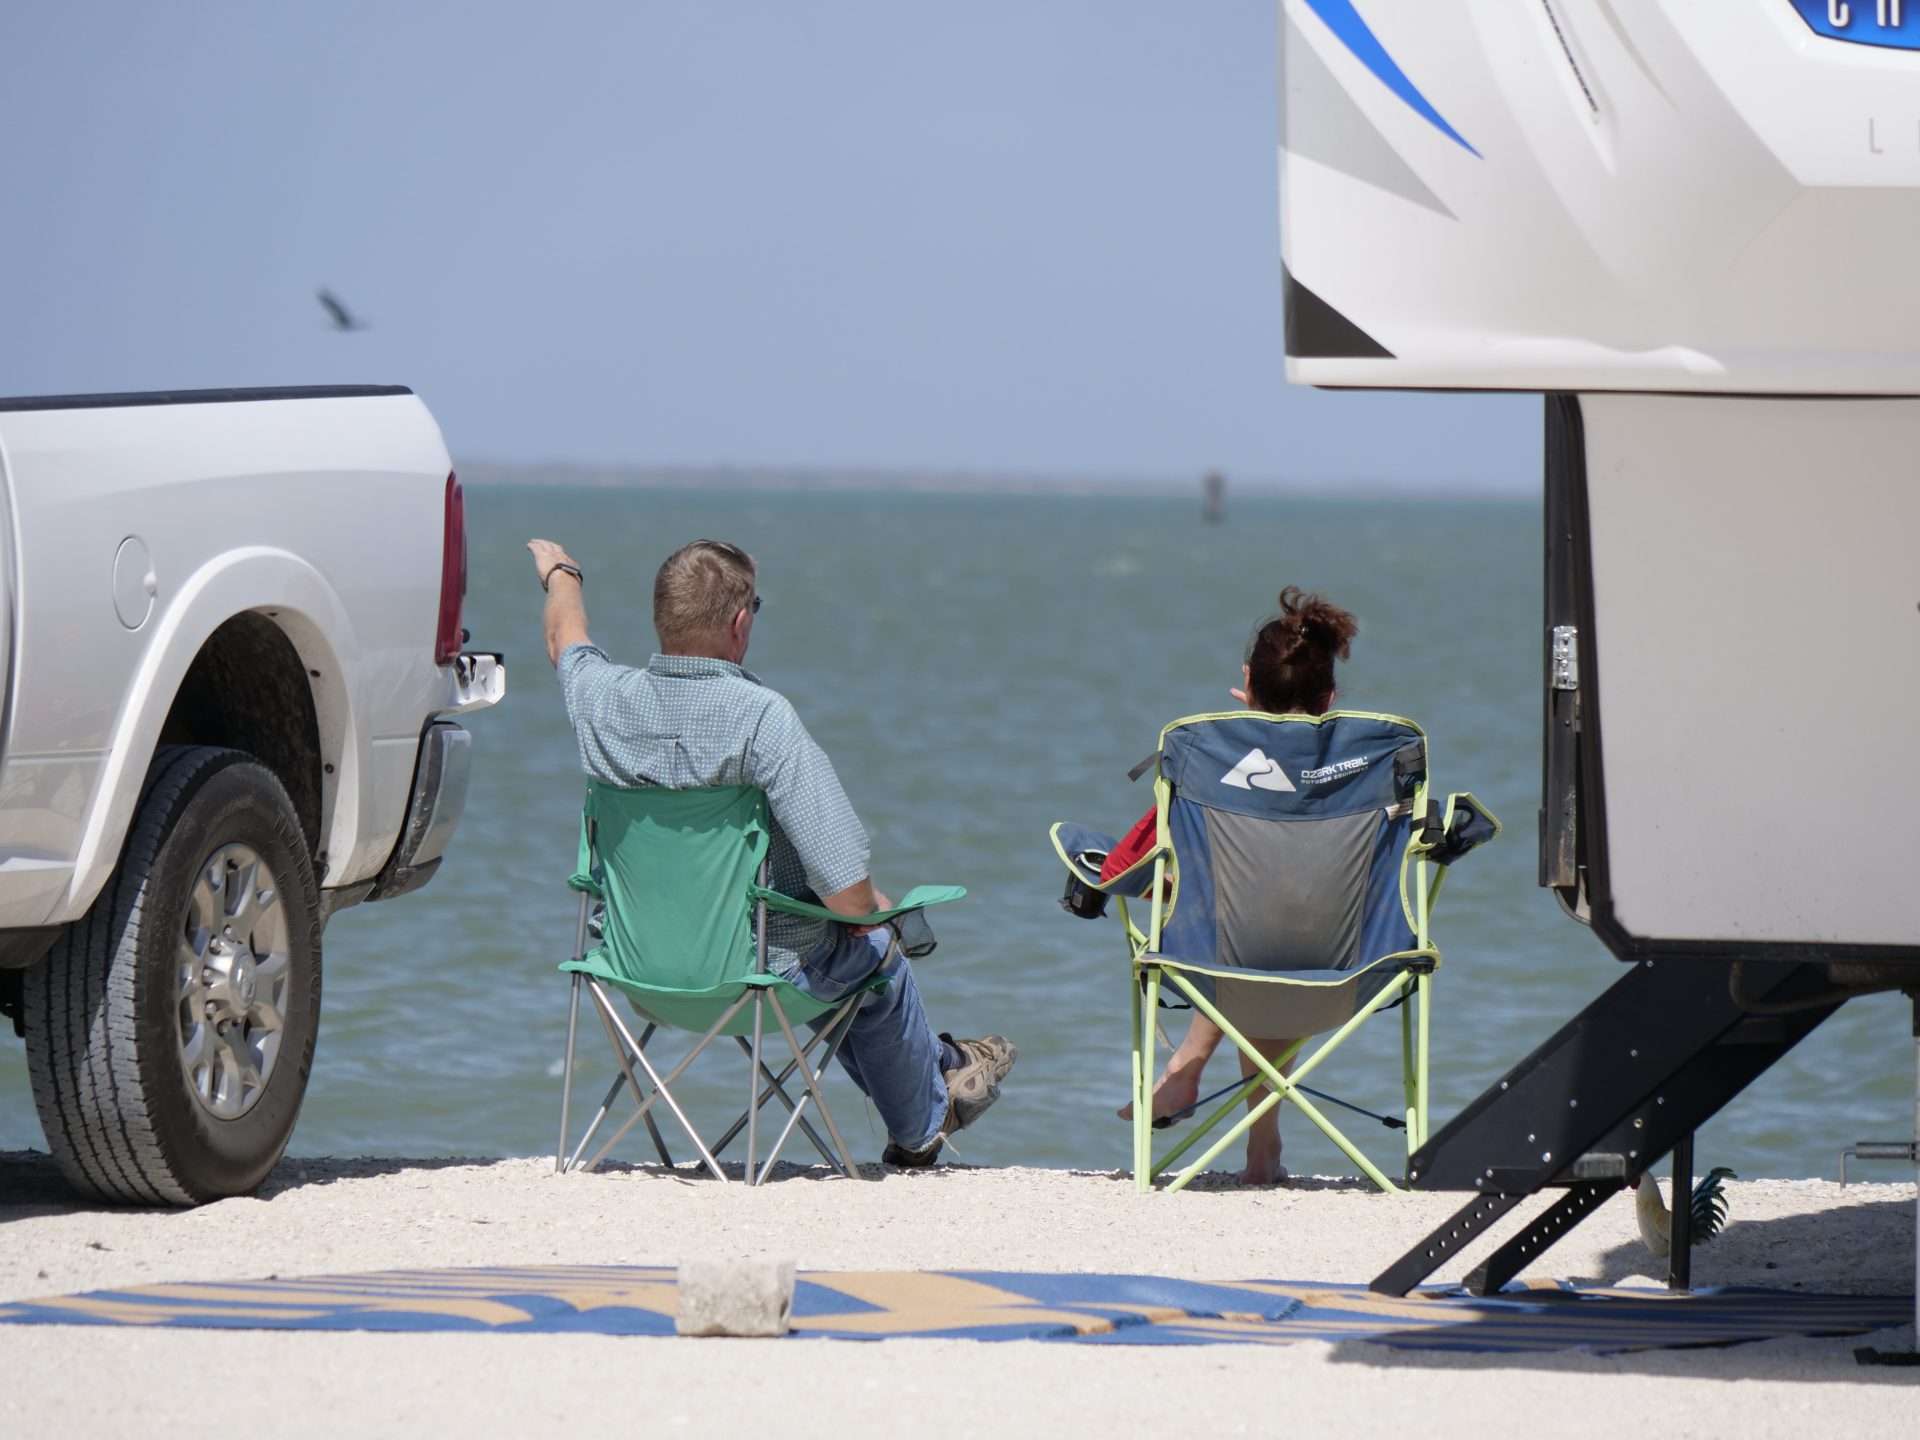 Two people sitting in front of RV on outdoor rug on the beach with lots of sand.